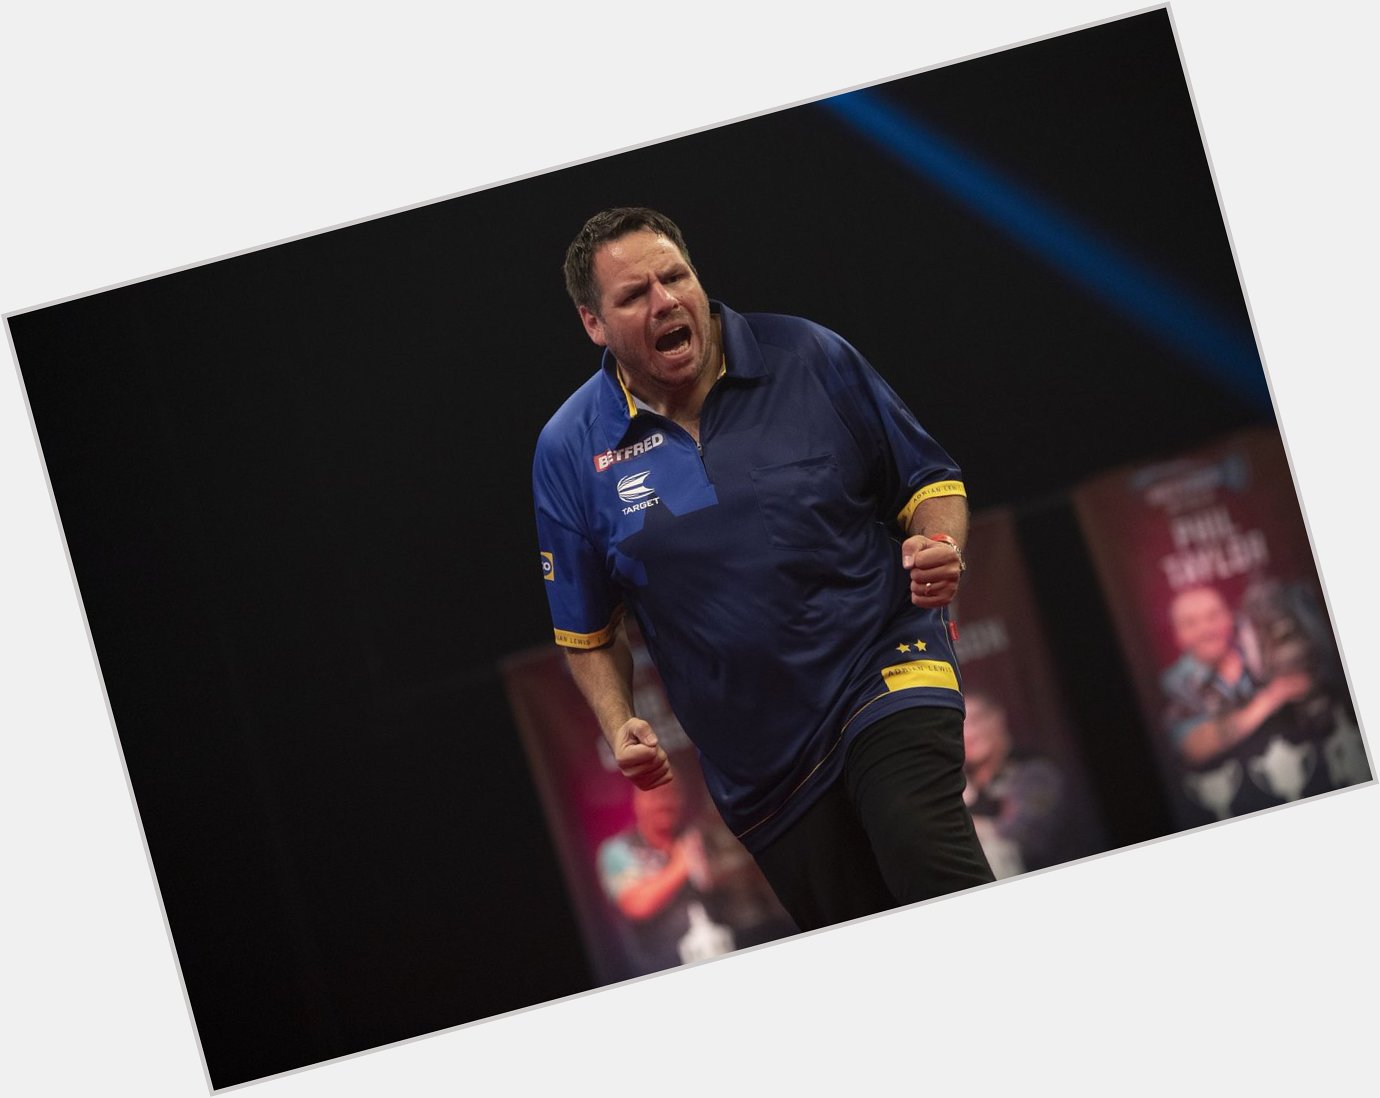 Happy birthday jackpot Adrian Lewis  my favourite pdc player, good luck for the year and stay safe  